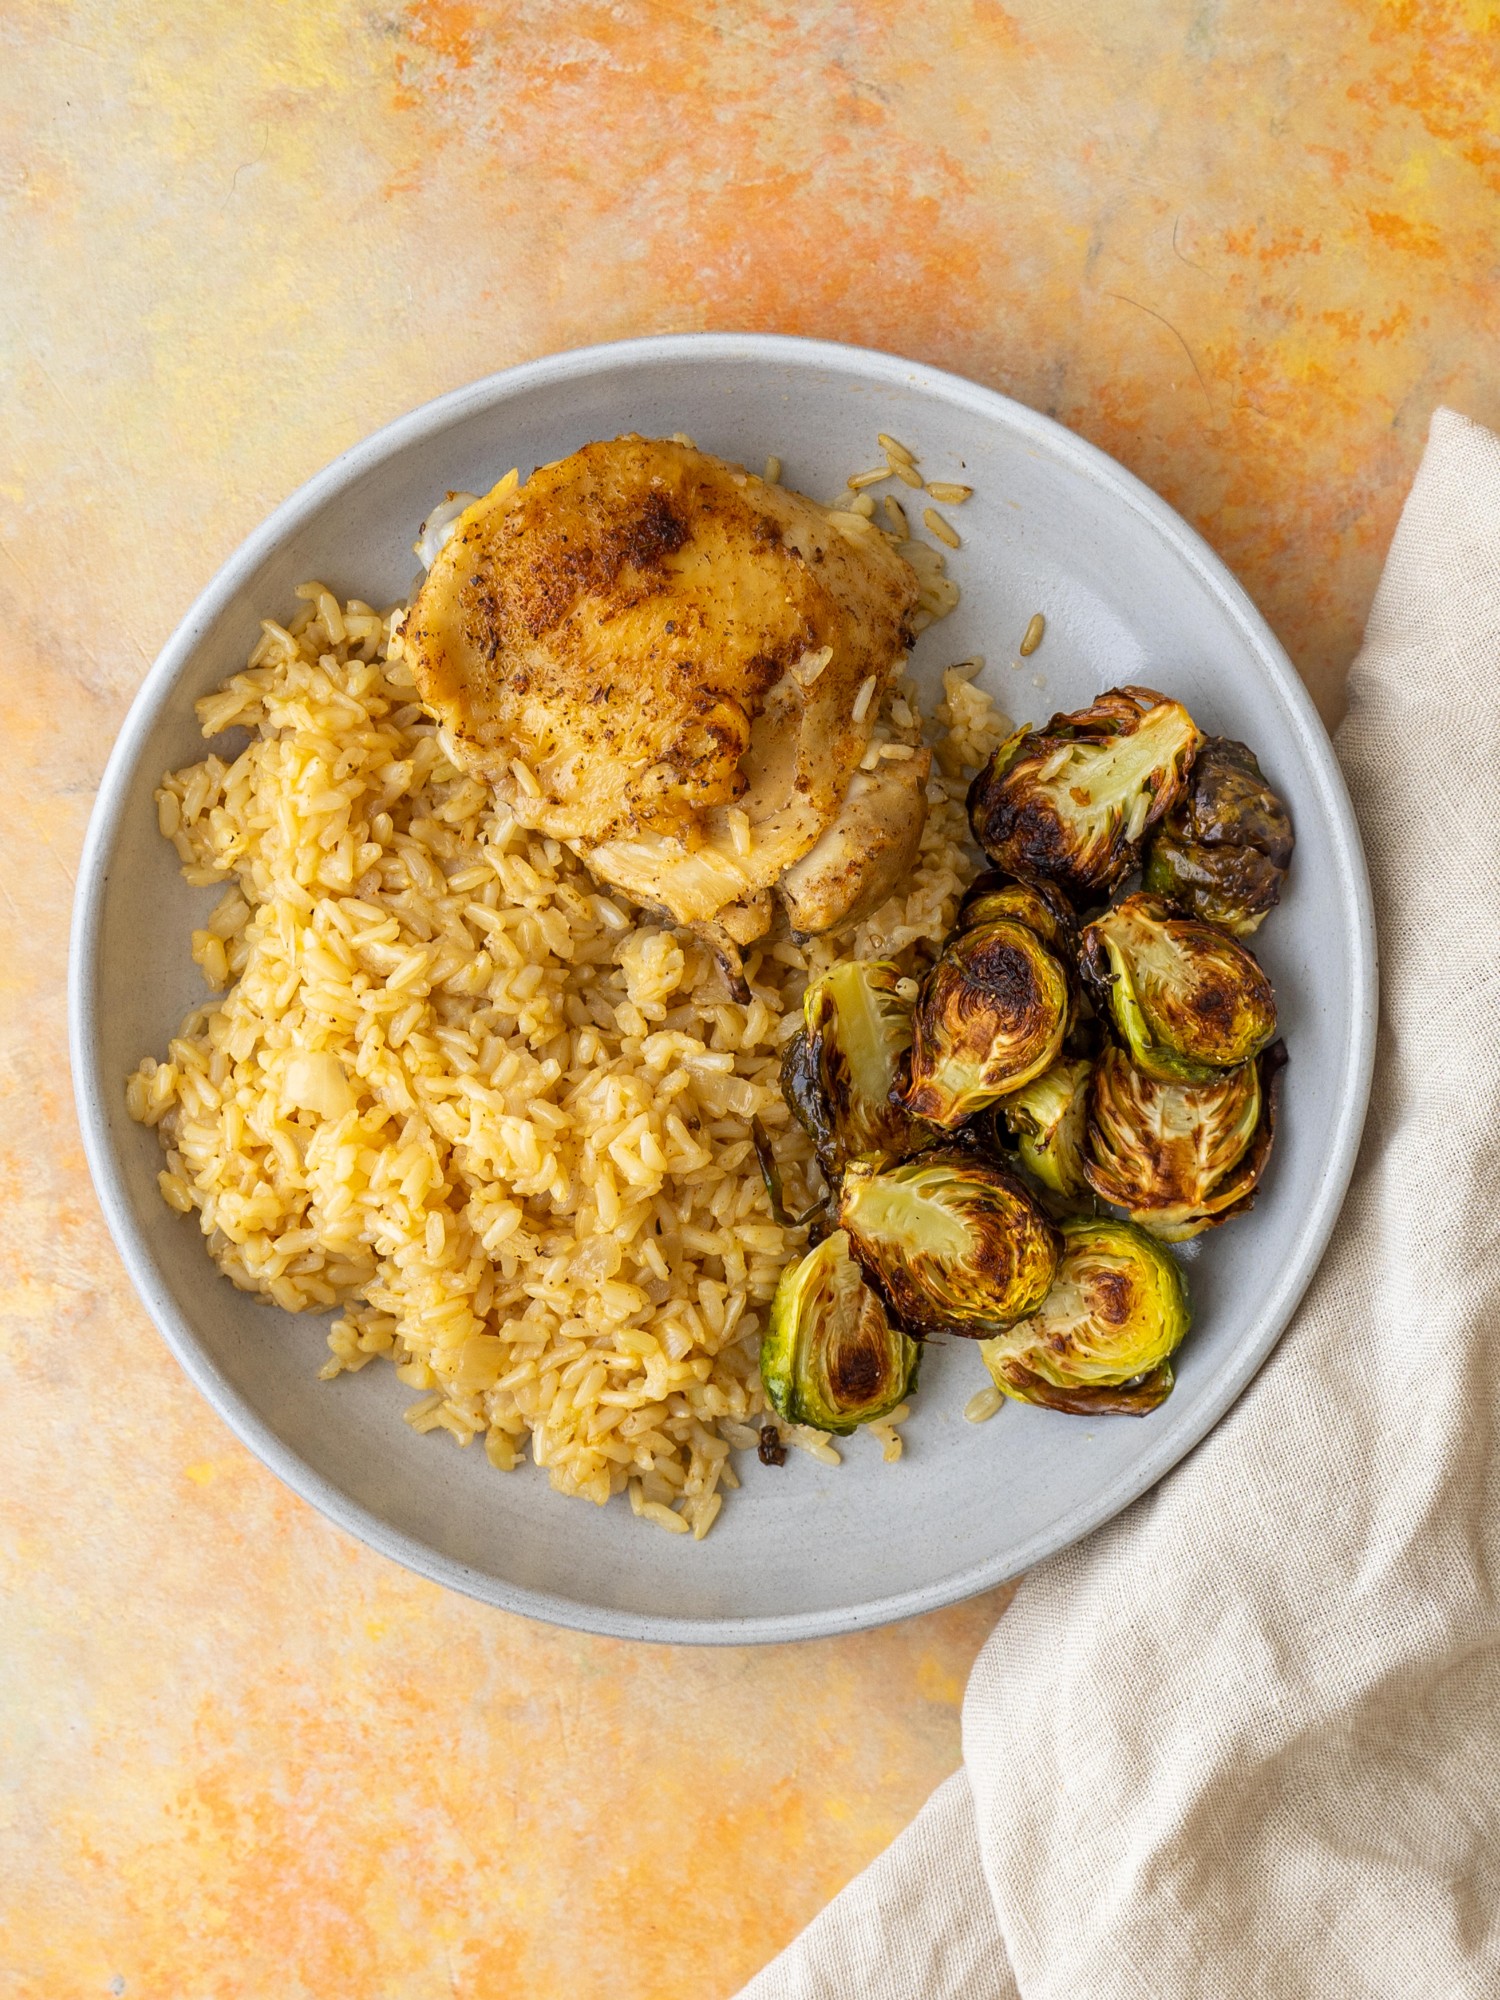 Instant pot chicken thighs and rice on a serving plate with roasted brussels sprouts